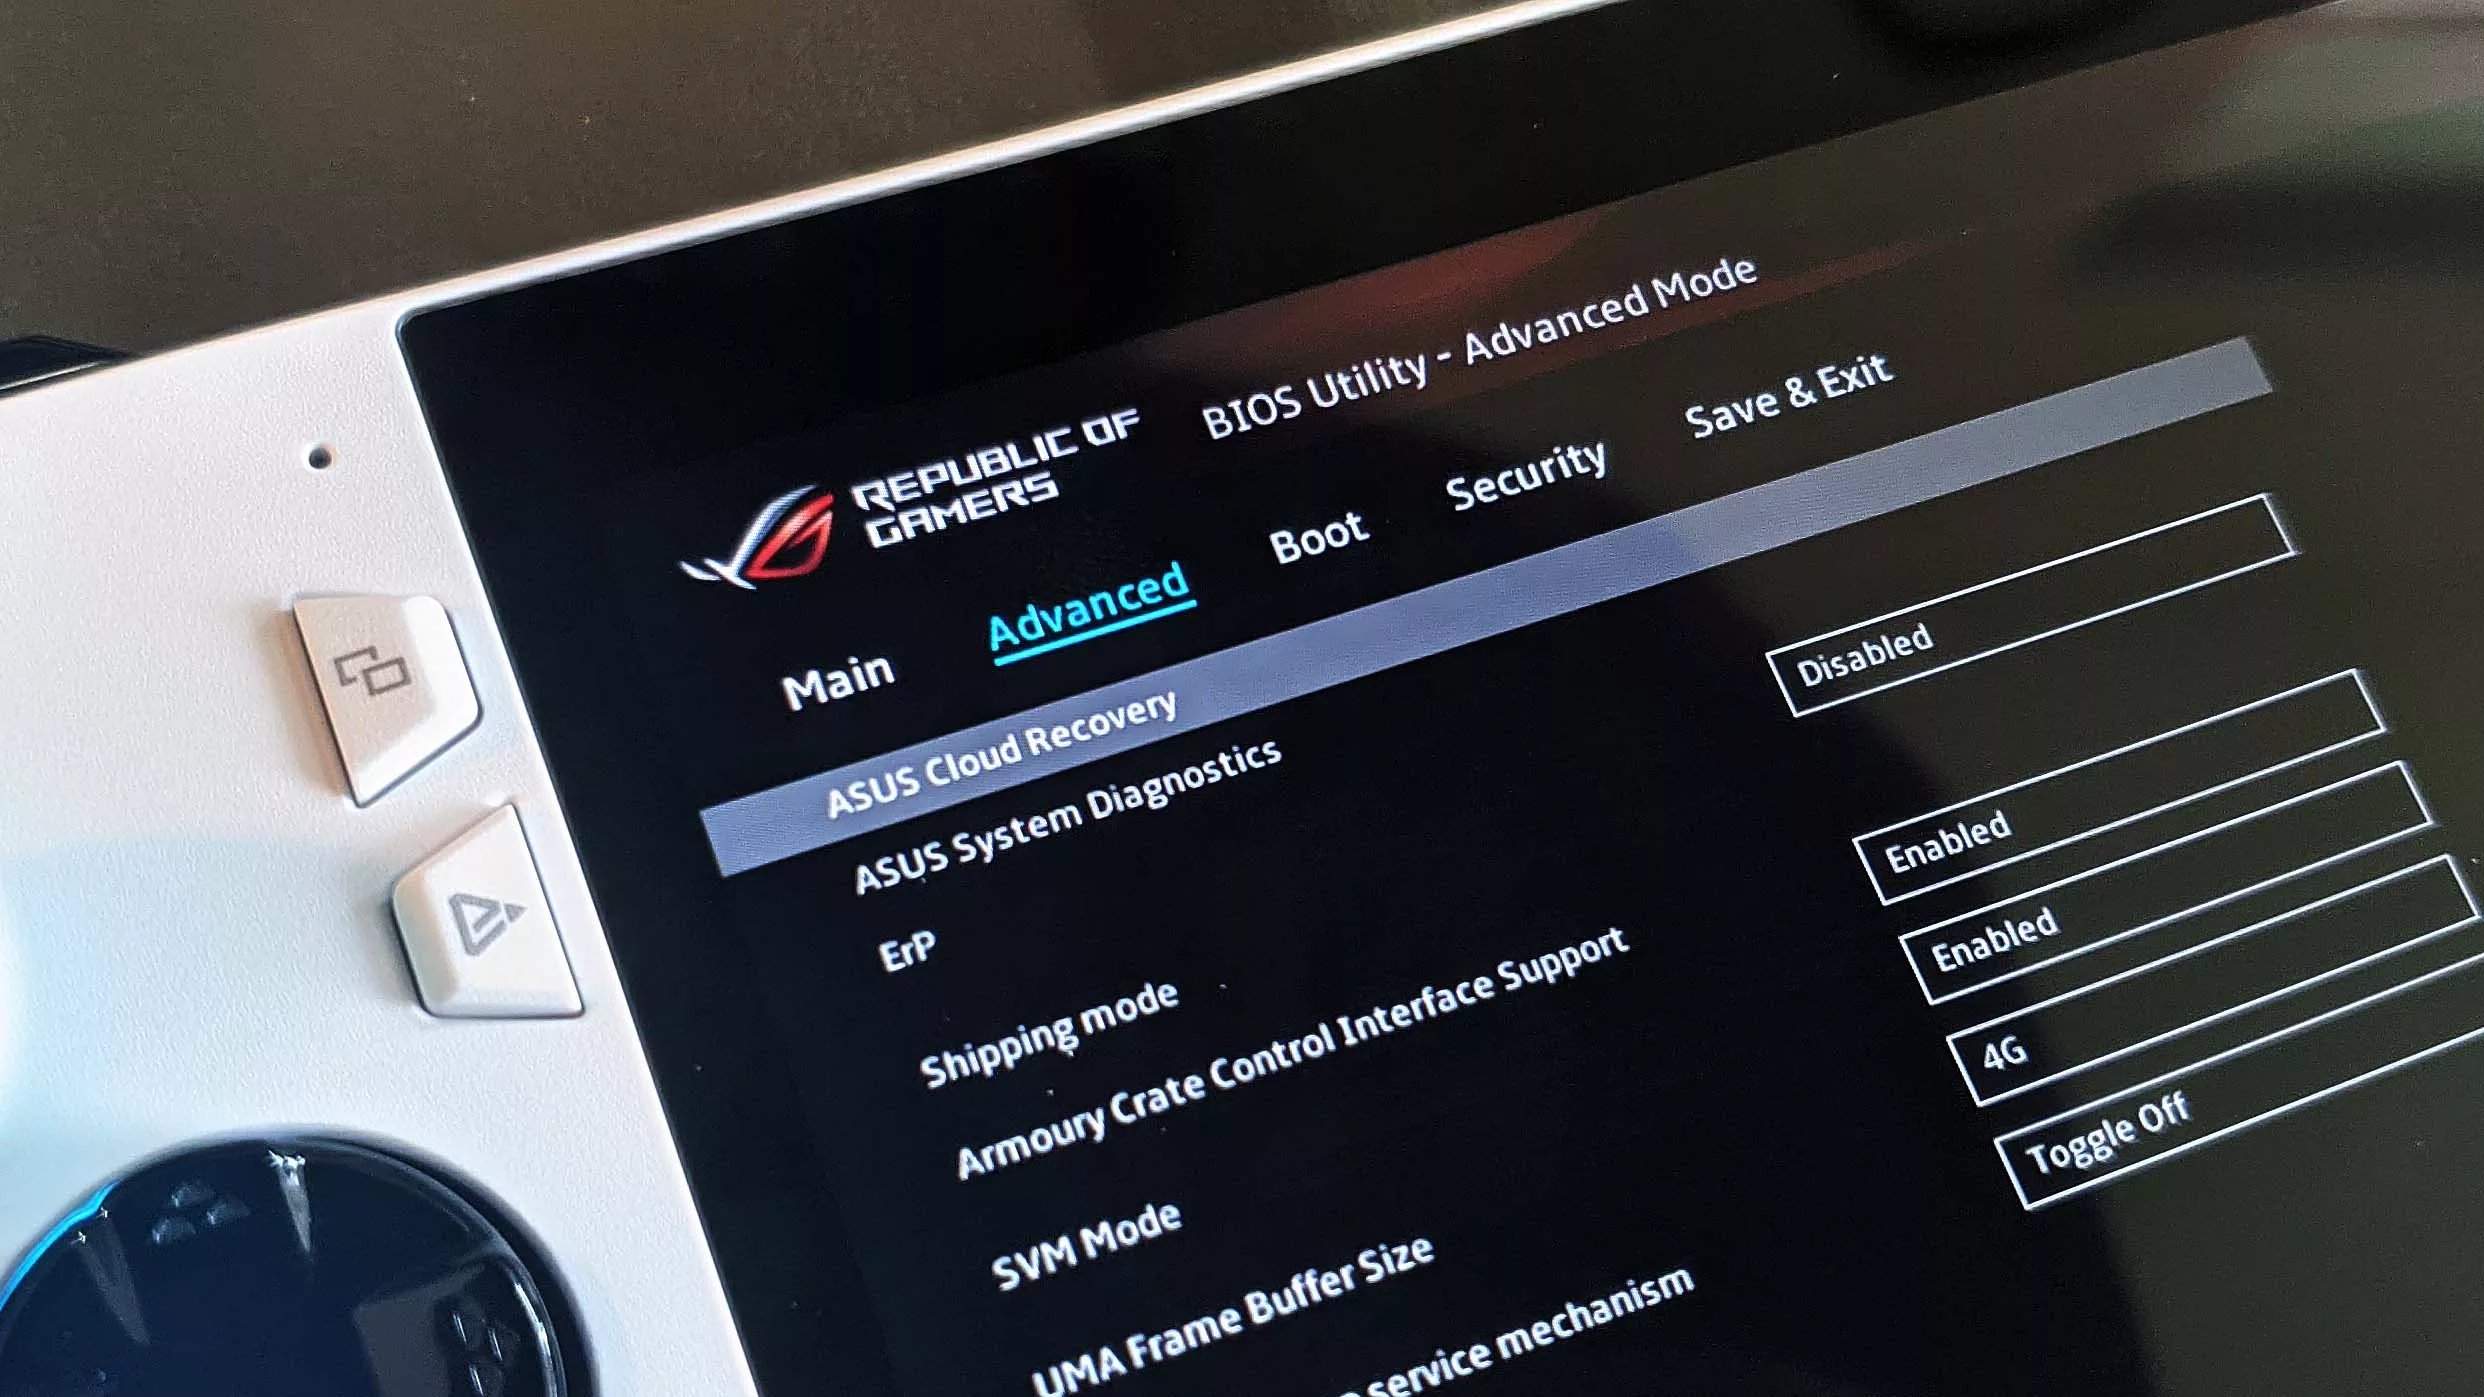 The ROG Ally's BIOS screen, with the ASUS Cloud Restore option highlighted.